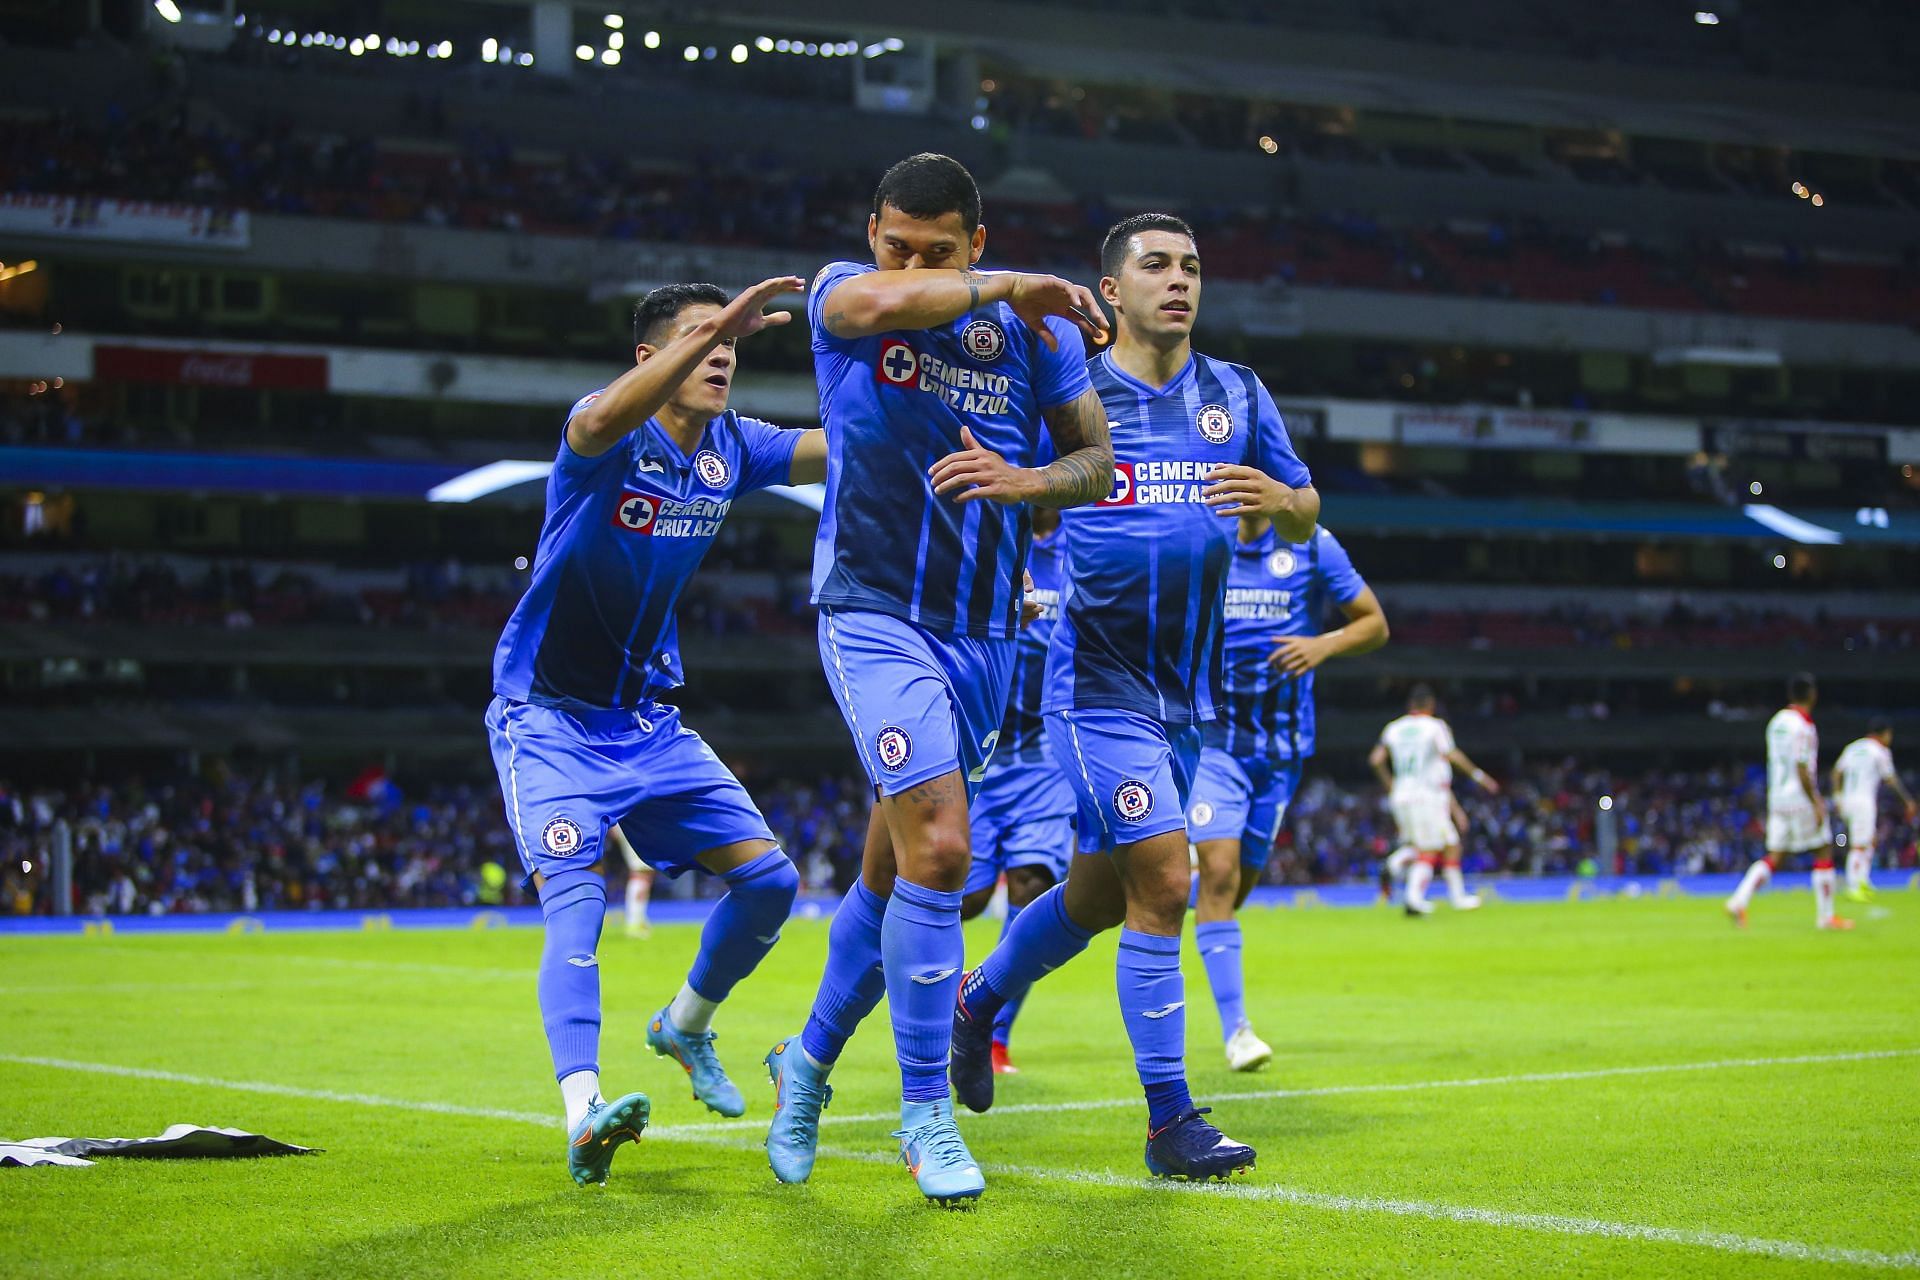 Cruz Azul host Forge in their upcoming CONCACAF Champions League fixture on Thursday